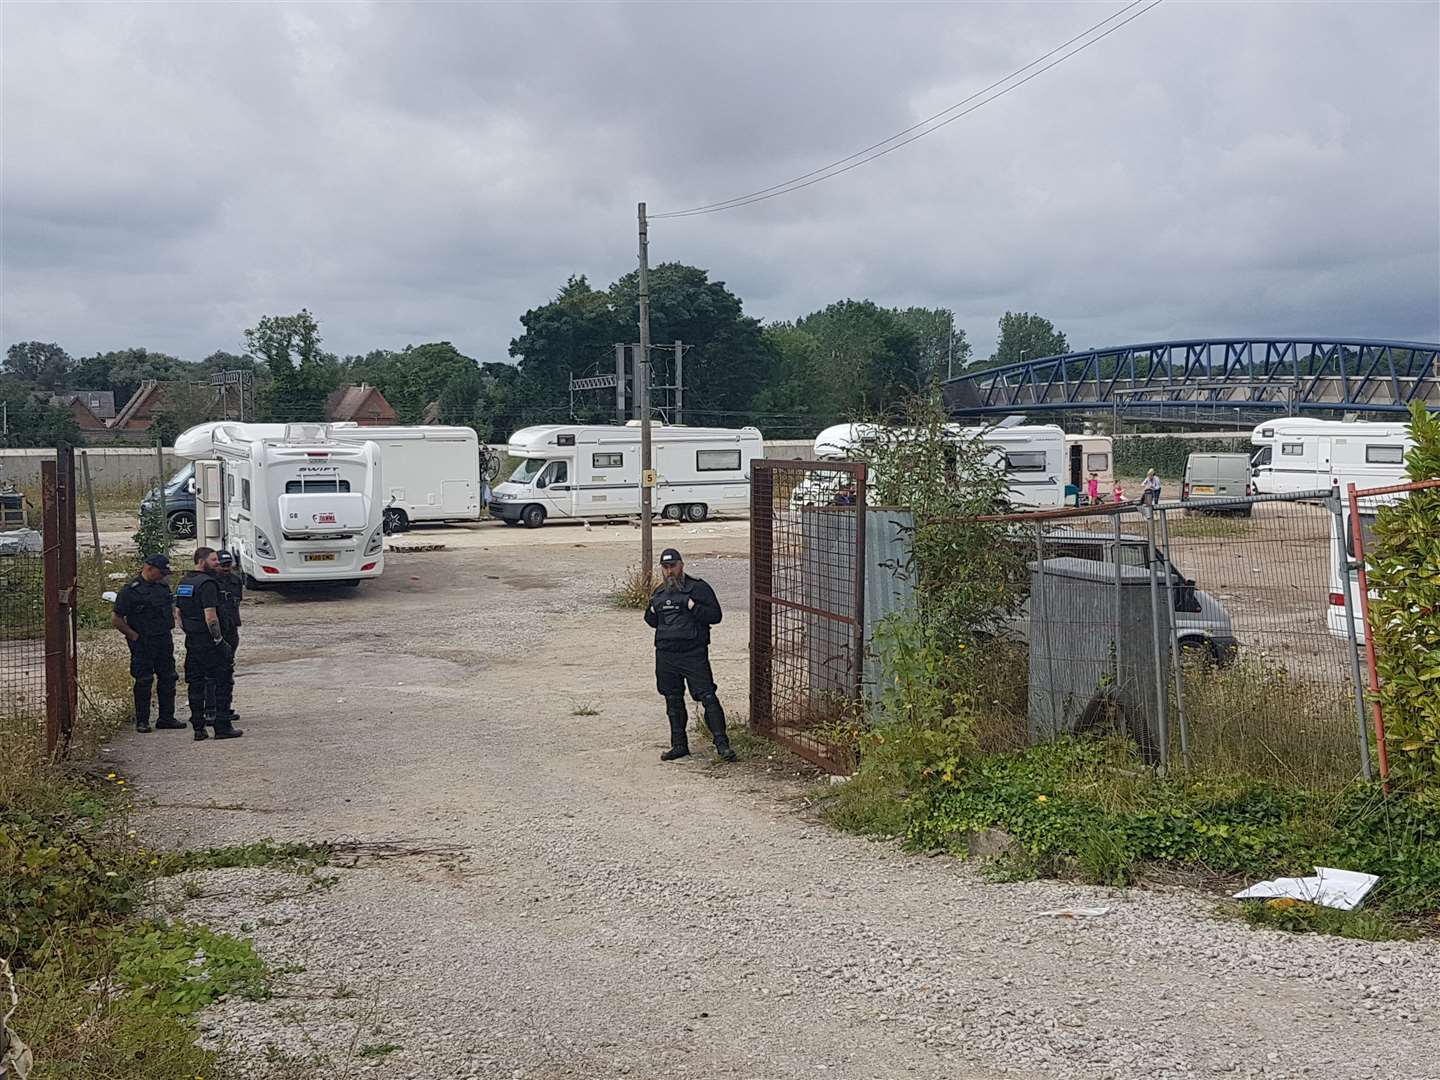 Bailiffs stationed at the entrance to the traveller camp on Elwick Road this morning